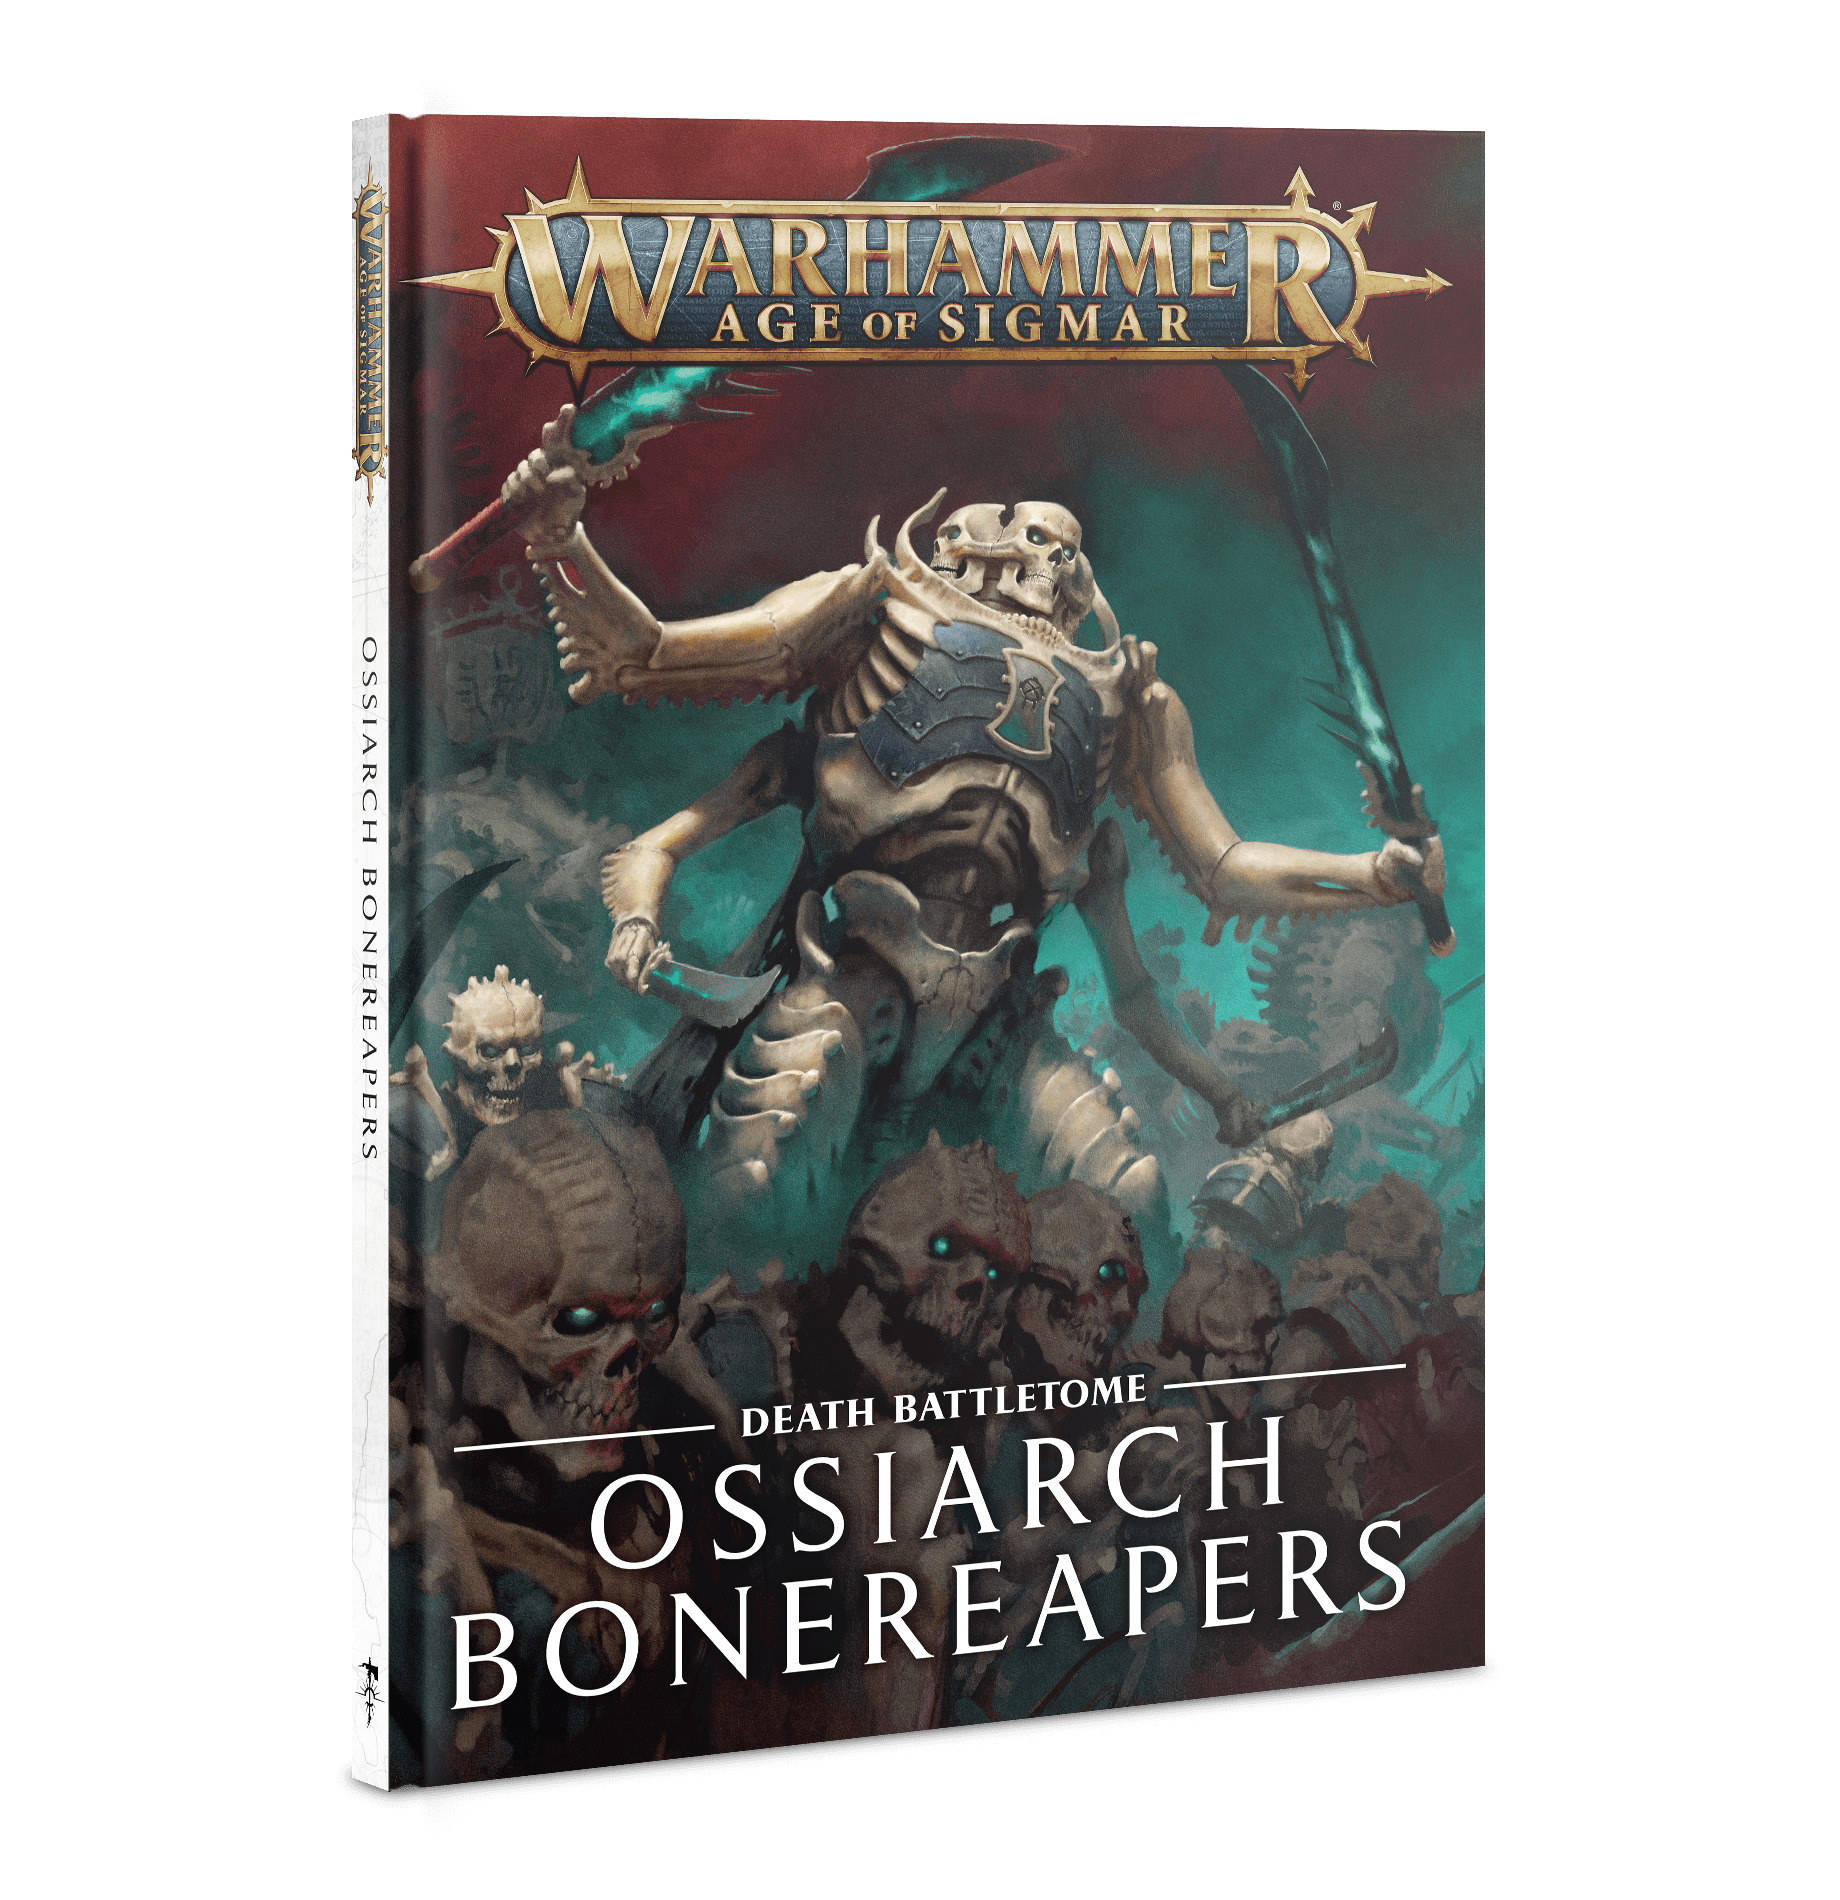 AOS: DEATH BATTLETOME - OSSIARCH BONEREAPERS [FRE] | BD Cosmos